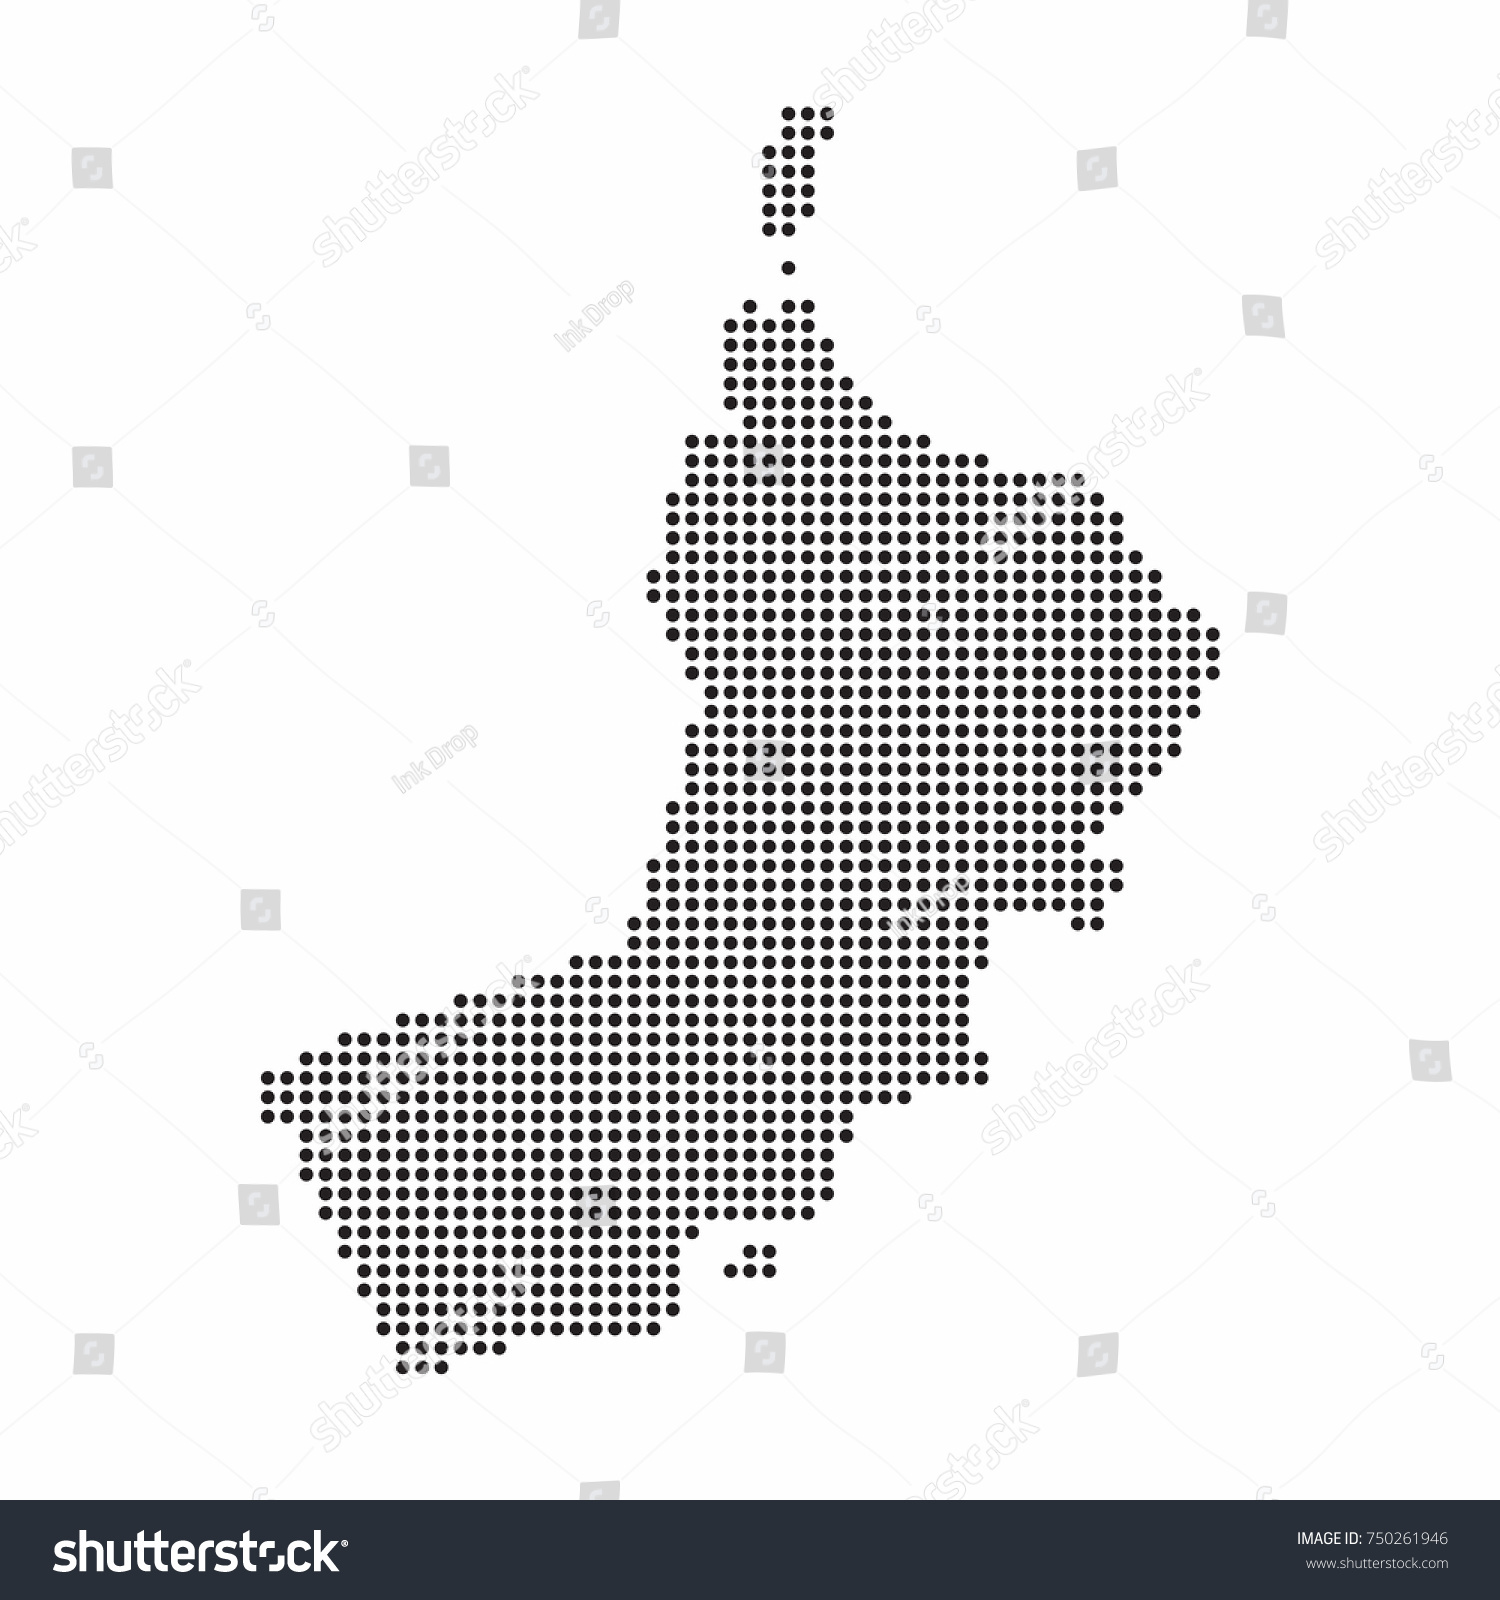 Oman Country Map Made From Abstract Halftone Dot Royalty Free Stock Vector 750261946 